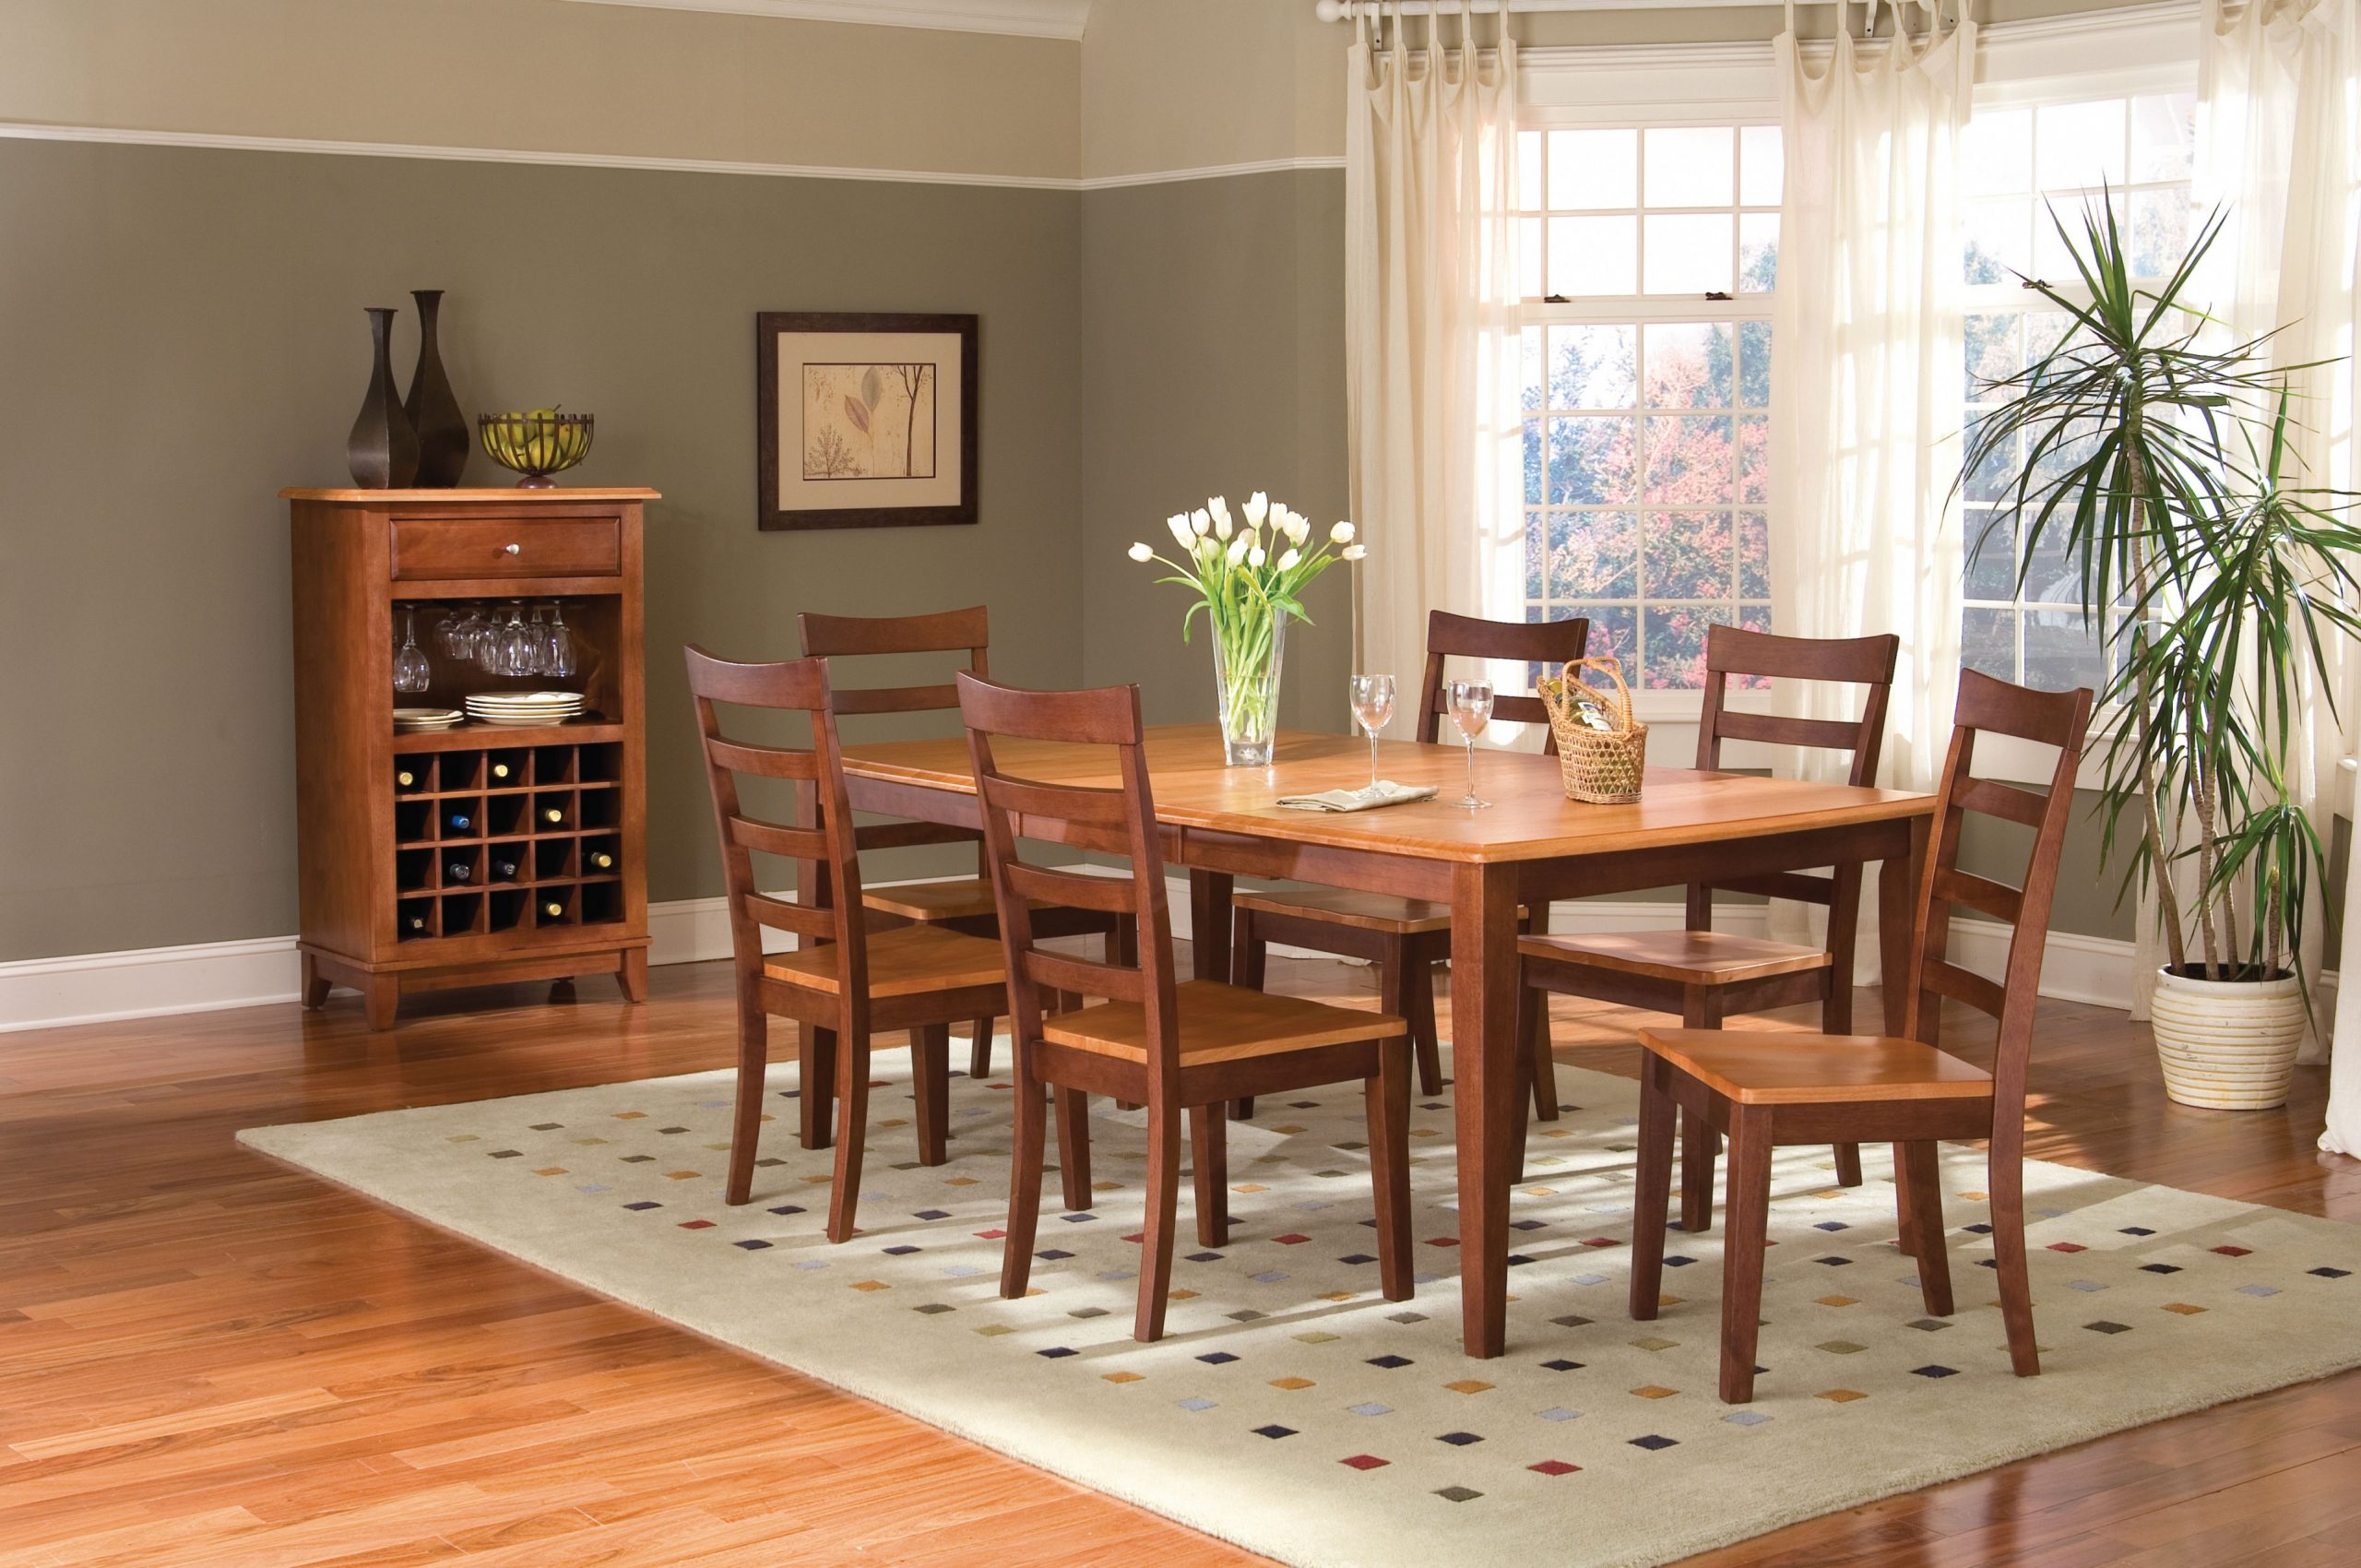 Decor Pub Dining Table Sets Havertys Dining Room Home Home inside dimensions 3836 X 2548